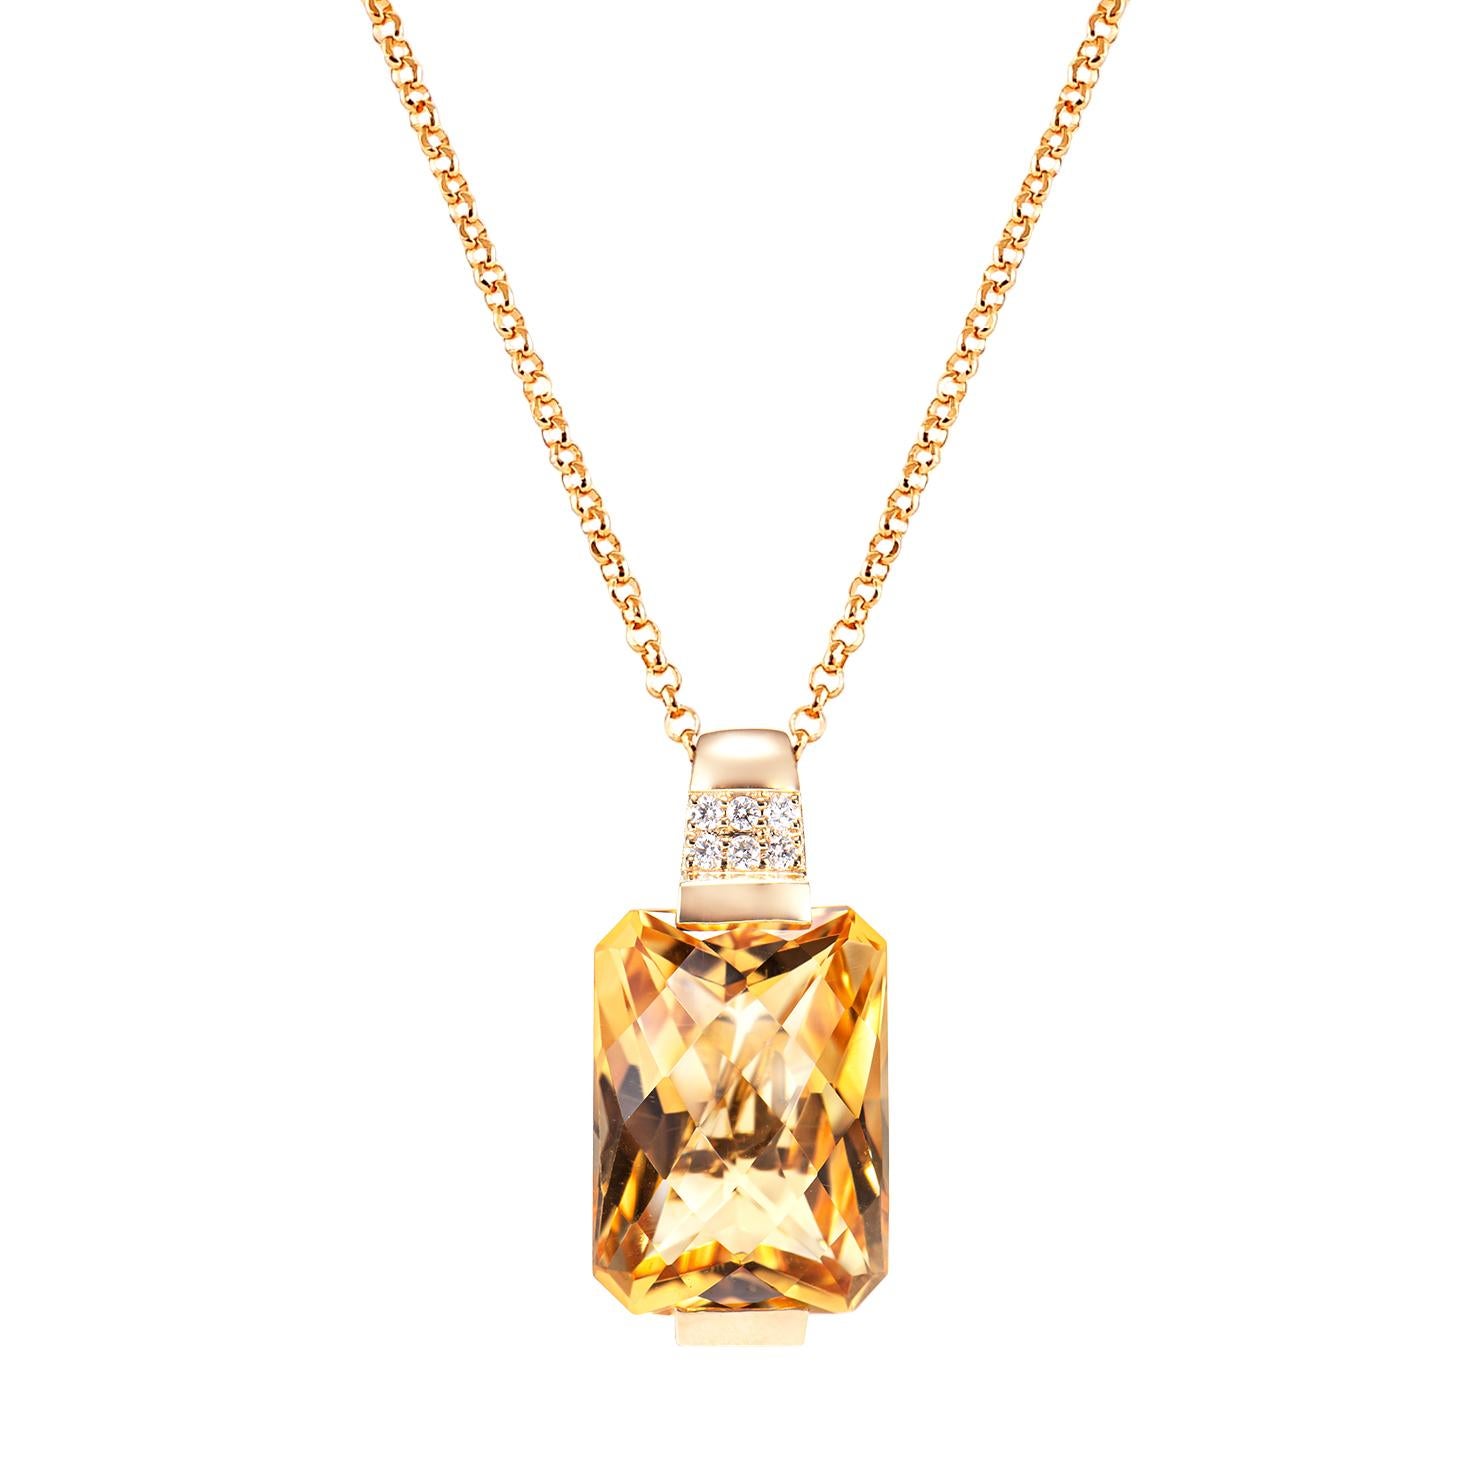 Octagon Cut 15.51 Carat Citrine Pendant in 18Karat Yellow Gold with White Diamond. For Sale